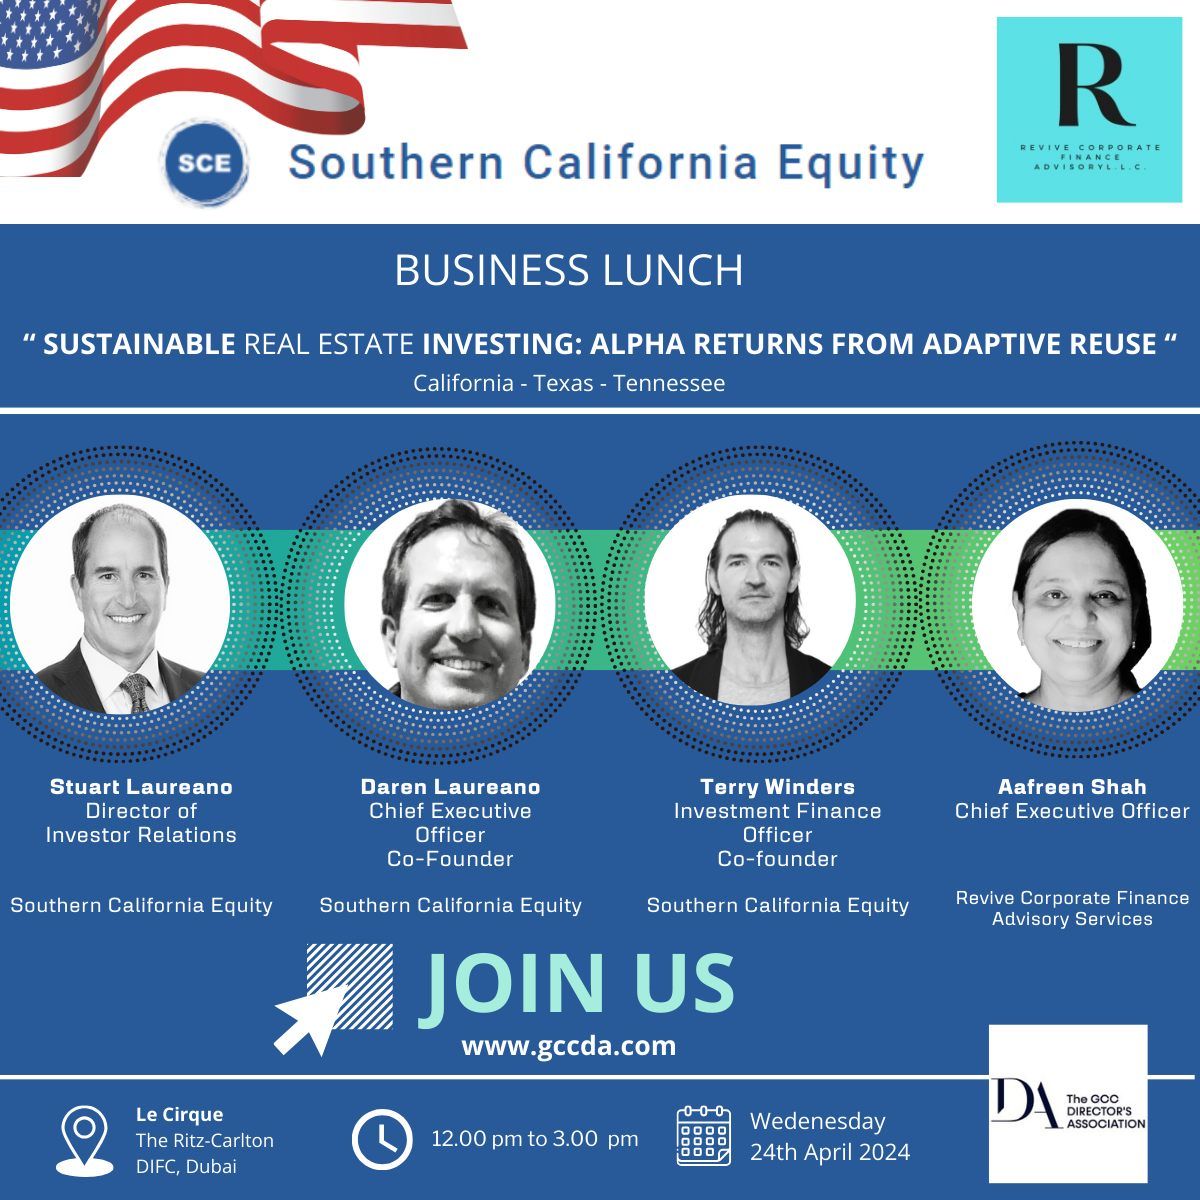 Business lunch: Sustainable real estate investing in the US 